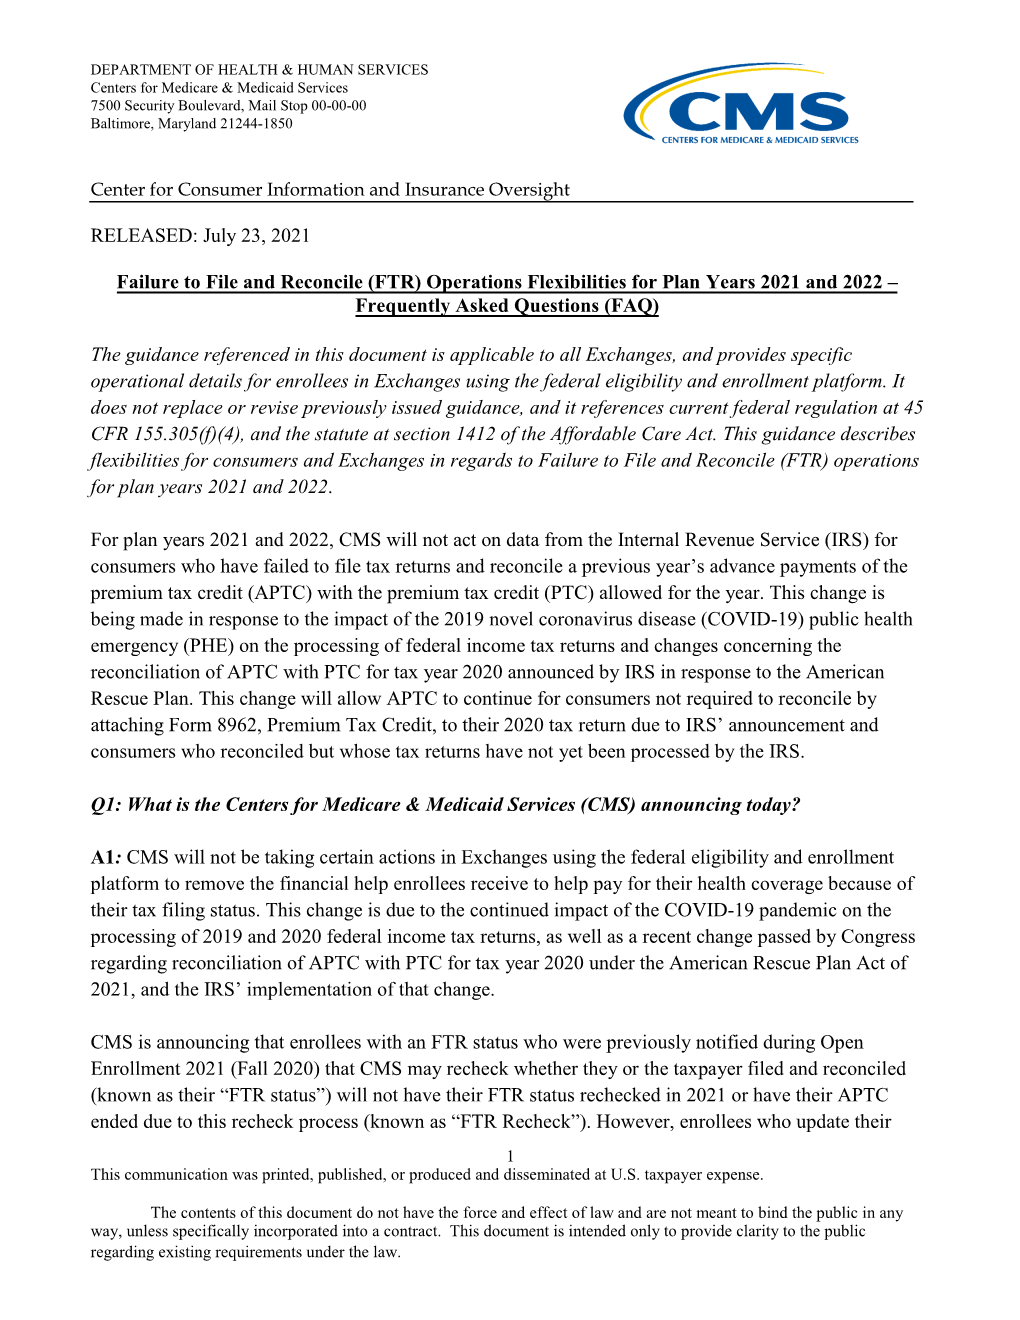 FTR) Operations Flexibilities for Plan Years 2021 and 2022 – Frequently Asked Questions (FAQ